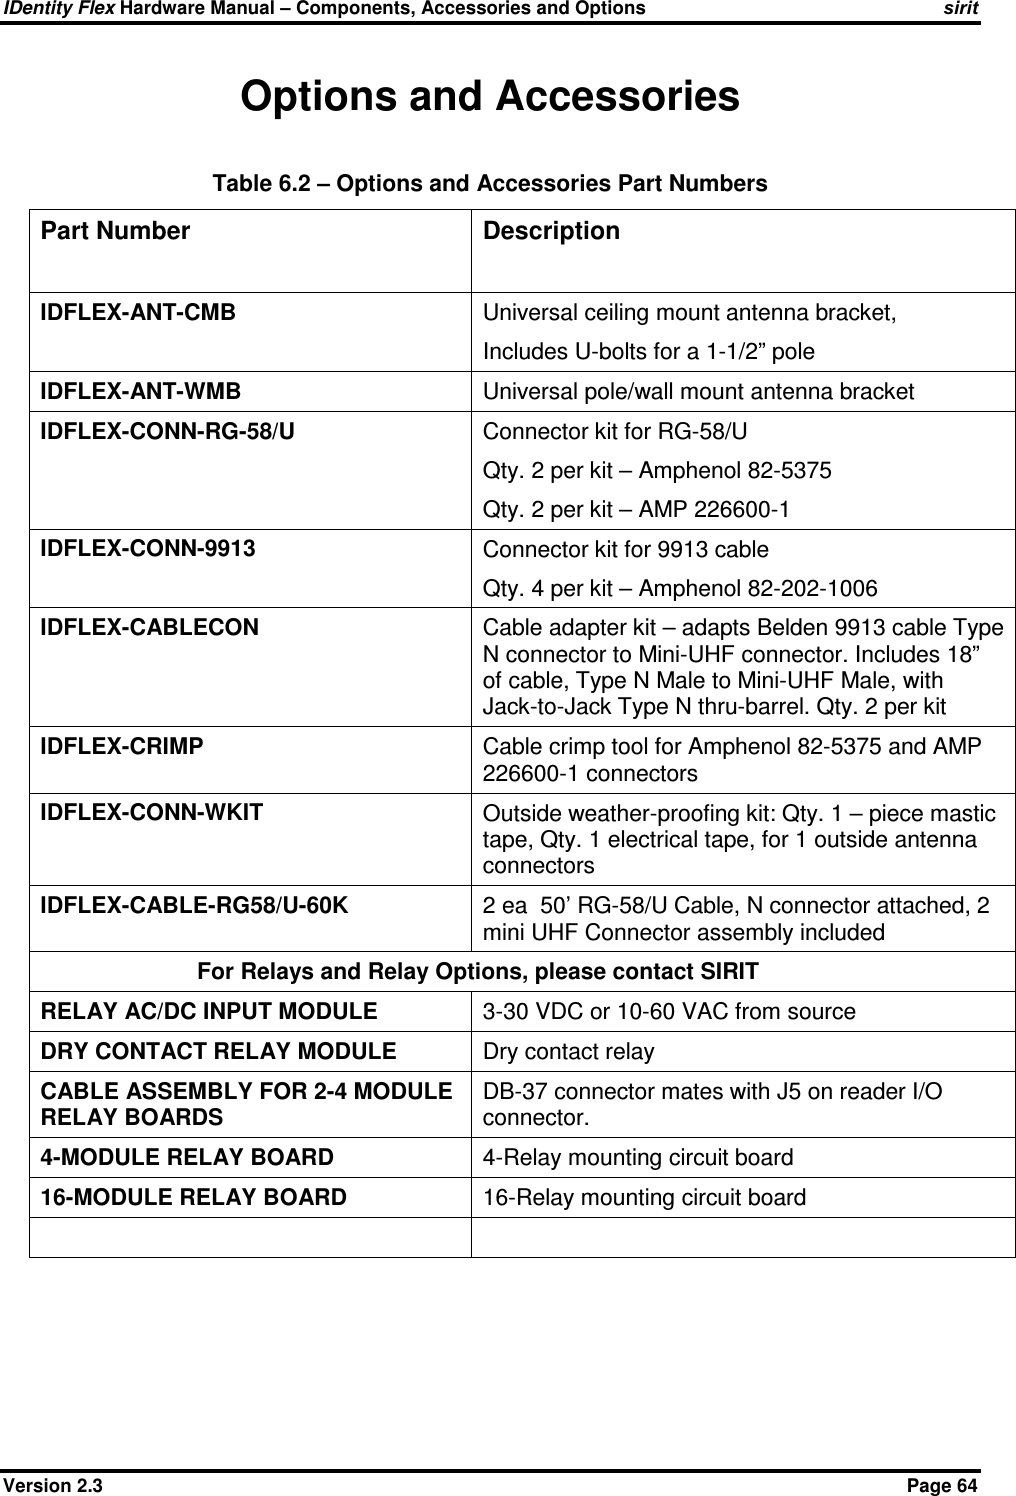 IDentity Flex Hardware Manual – Components, Accessories and Options sirit Version 2.3    Page 64 Options and Accessories Table 6.2 – Options and Accessories Part Numbers Part Number  Description IDFLEX-ANT-CMB  Universal ceiling mount antenna bracket, Includes U-bolts for a 1-1/2” pole IDFLEX-ANT-WMB  Universal pole/wall mount antenna bracket IDFLEX-CONN-RG-58/U  Connector kit for RG-58/U Qty. 2 per kit – Amphenol 82-5375 Qty. 2 per kit – AMP 226600-1 IDFLEX-CONN-9913  Connector kit for 9913 cable Qty. 4 per kit – Amphenol 82-202-1006 IDFLEX-CABLECON  Cable adapter kit – adapts Belden 9913 cable Type N connector to Mini-UHF connector. Includes 18” of cable, Type N Male to Mini-UHF Male, with Jack-to-Jack Type N thru-barrel. Qty. 2 per kit IDFLEX-CRIMP  Cable crimp tool for Amphenol 82-5375 and AMP 226600-1 connectors IDFLEX-CONN-WKIT  Outside weather-proofing kit: Qty. 1 – piece mastic tape, Qty. 1 electrical tape, for 1 outside antenna connectors IDFLEX-CABLE-RG58/U-60K  2 ea  50’ RG-58/U Cable, N connector attached, 2 mini UHF Connector assembly included For Relays and Relay Options, please contact SIRIT   RELAY AC/DC INPUT MODULE  3-30 VDC or 10-60 VAC from source DRY CONTACT RELAY MODULE  Dry contact relay CABLE ASSEMBLY FOR 2-4 MODULE RELAY BOARDS DB-37 connector mates with J5 on reader I/O connector. 4-MODULE RELAY BOARD  4-Relay mounting circuit board 16-MODULE RELAY BOARD  16-Relay mounting circuit board   